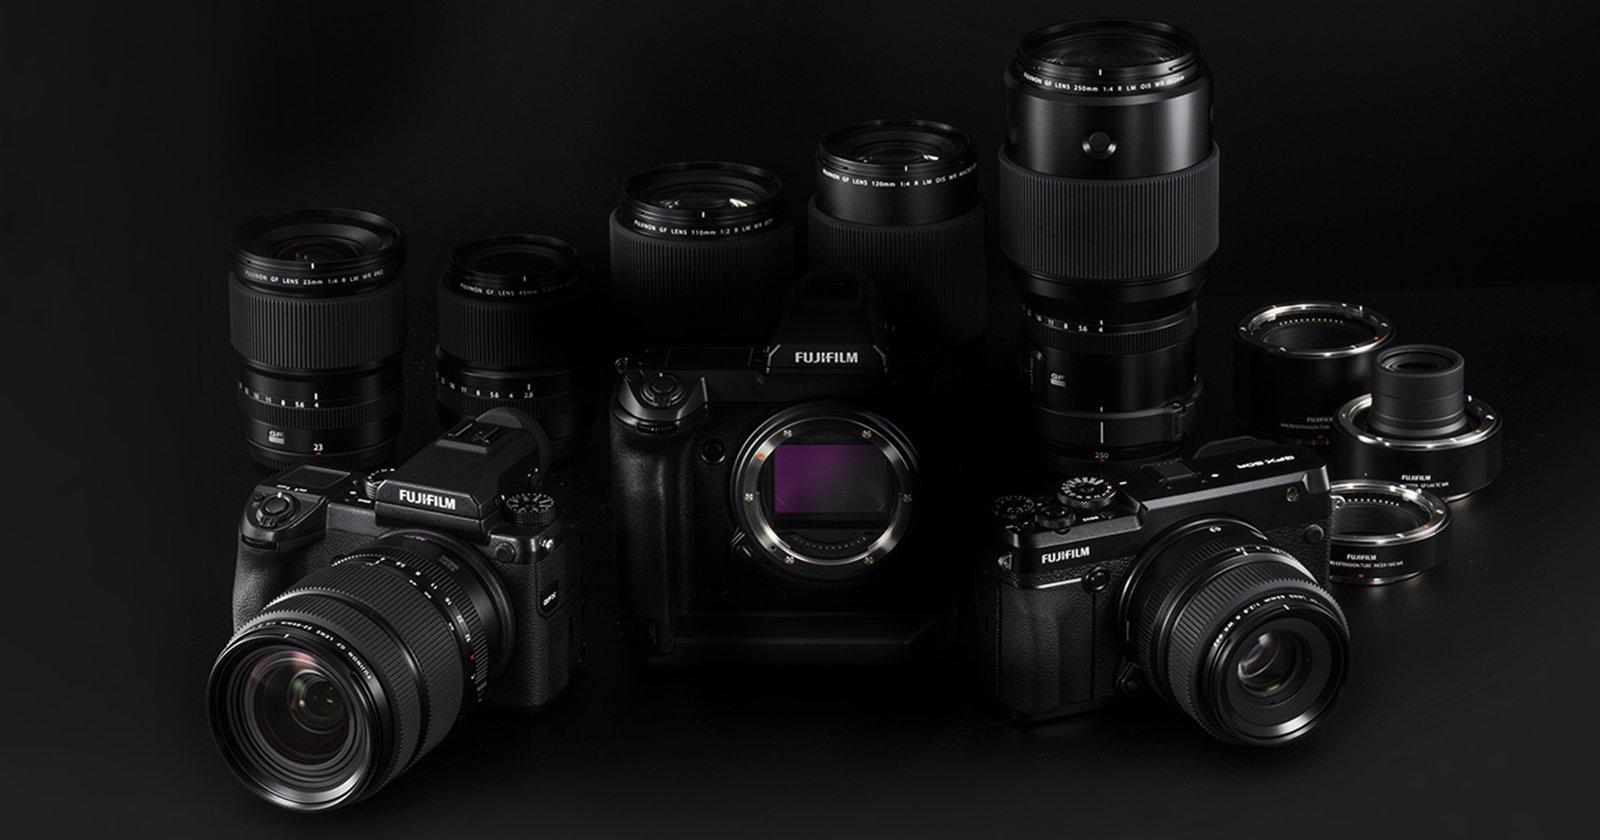 Fuji has just dropped “the biggest firmware upgrade in the history of the Fujifilm GFX system,” complete with several major photo and video improv